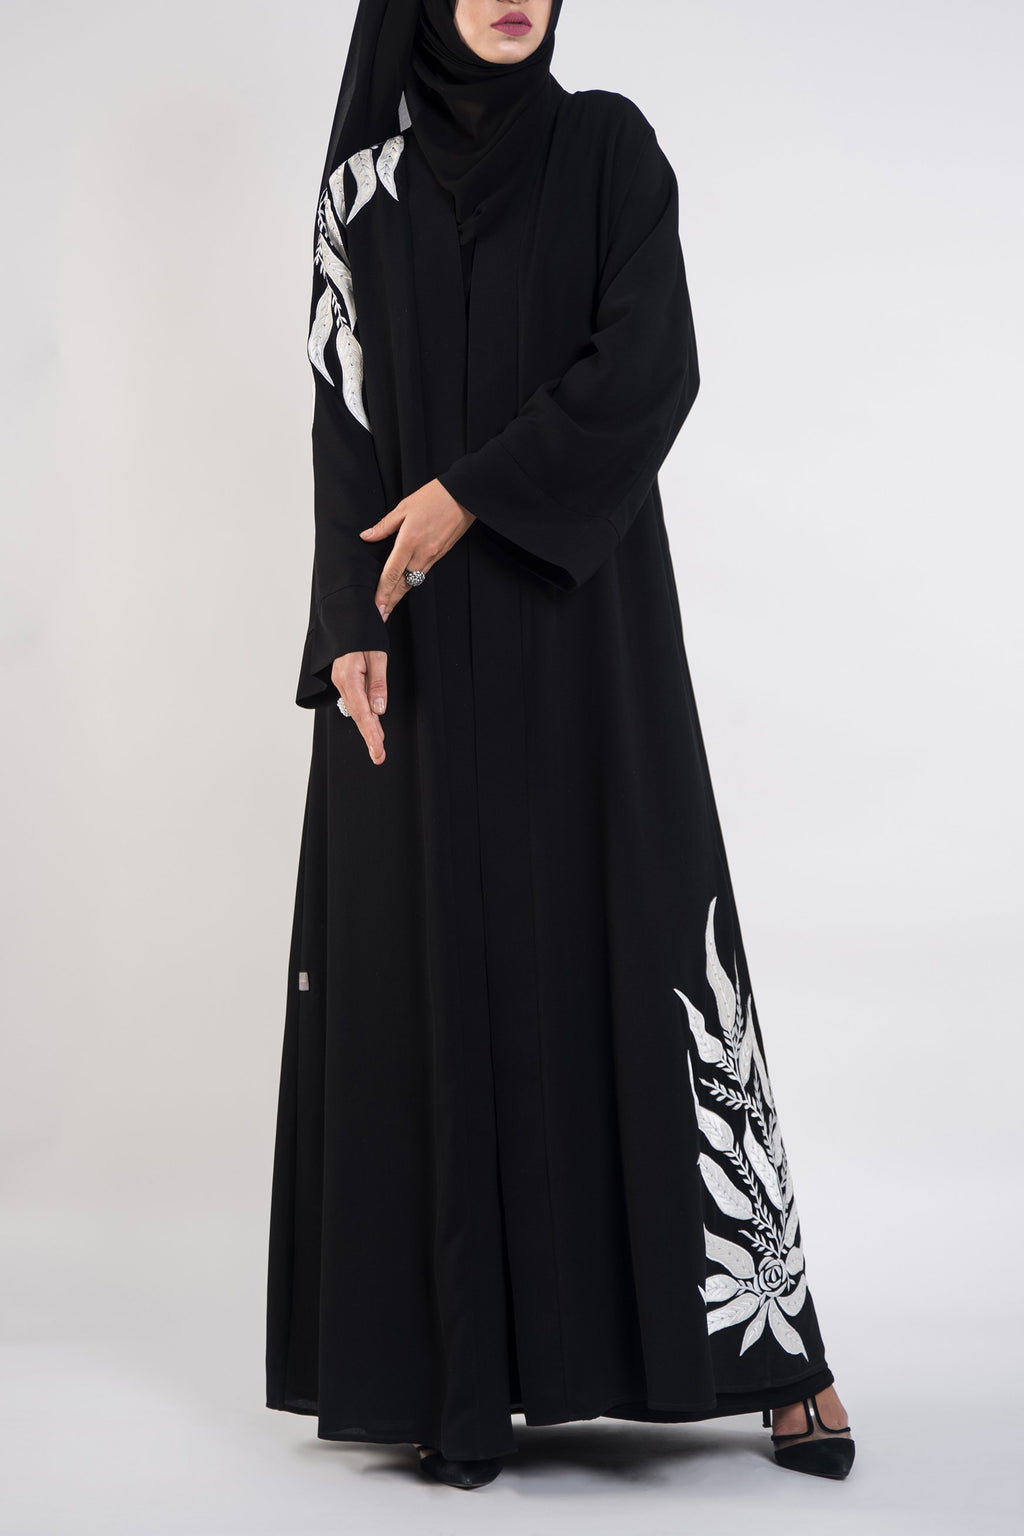 Black and white embroidery abaya - thowby - best abayas in the UAE